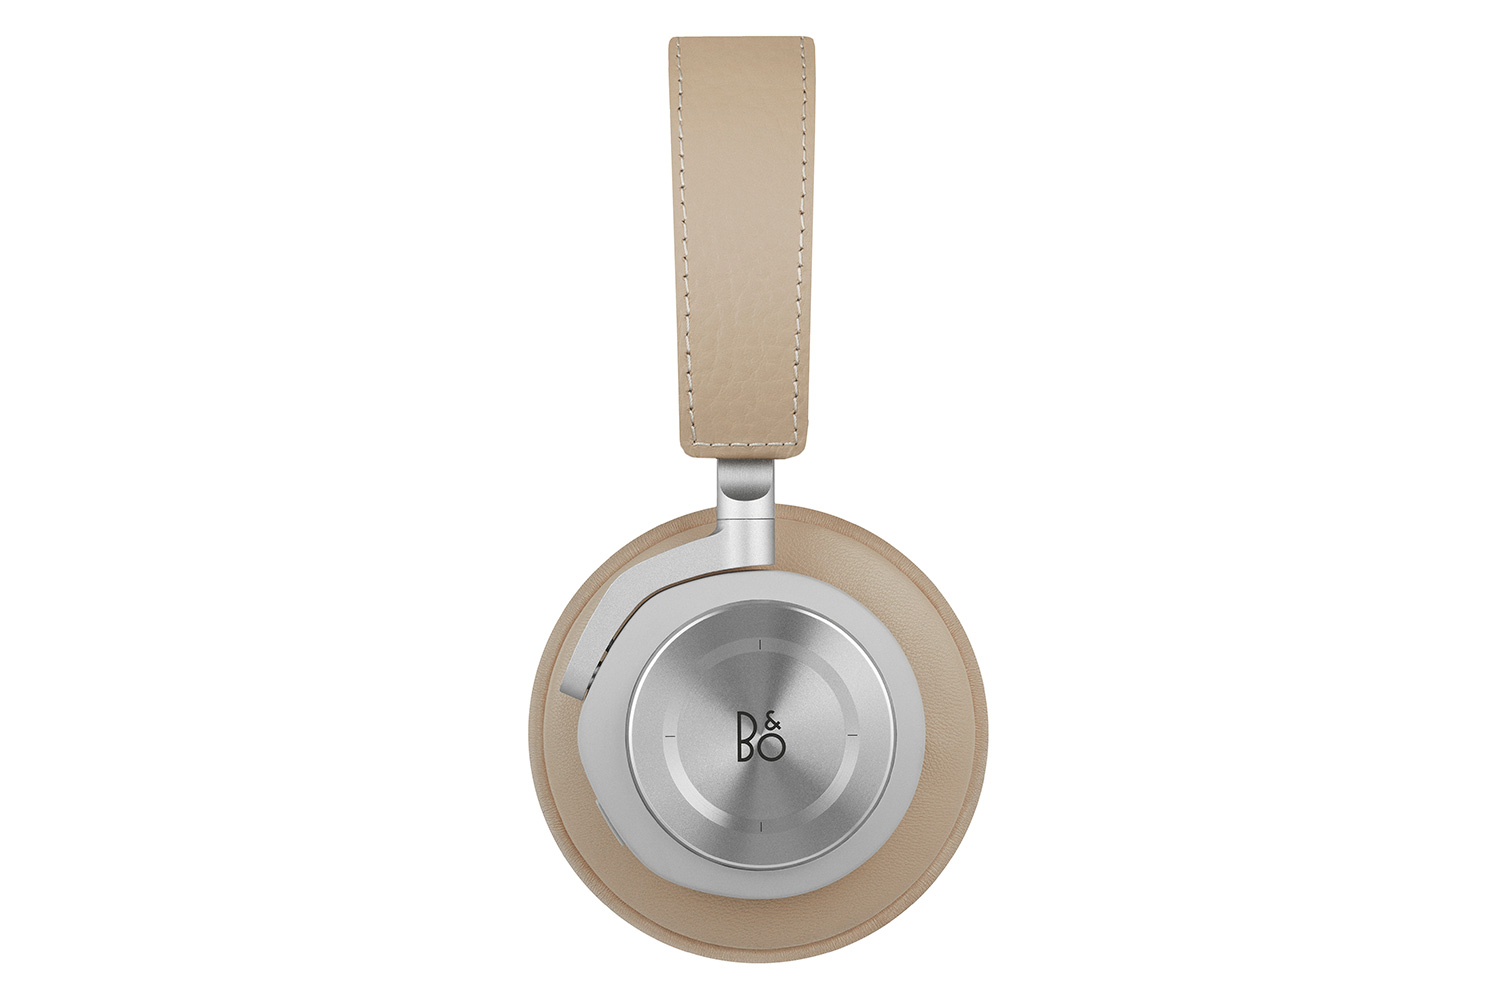 bang olufsen h7 headphones video review b o beoplay 0014